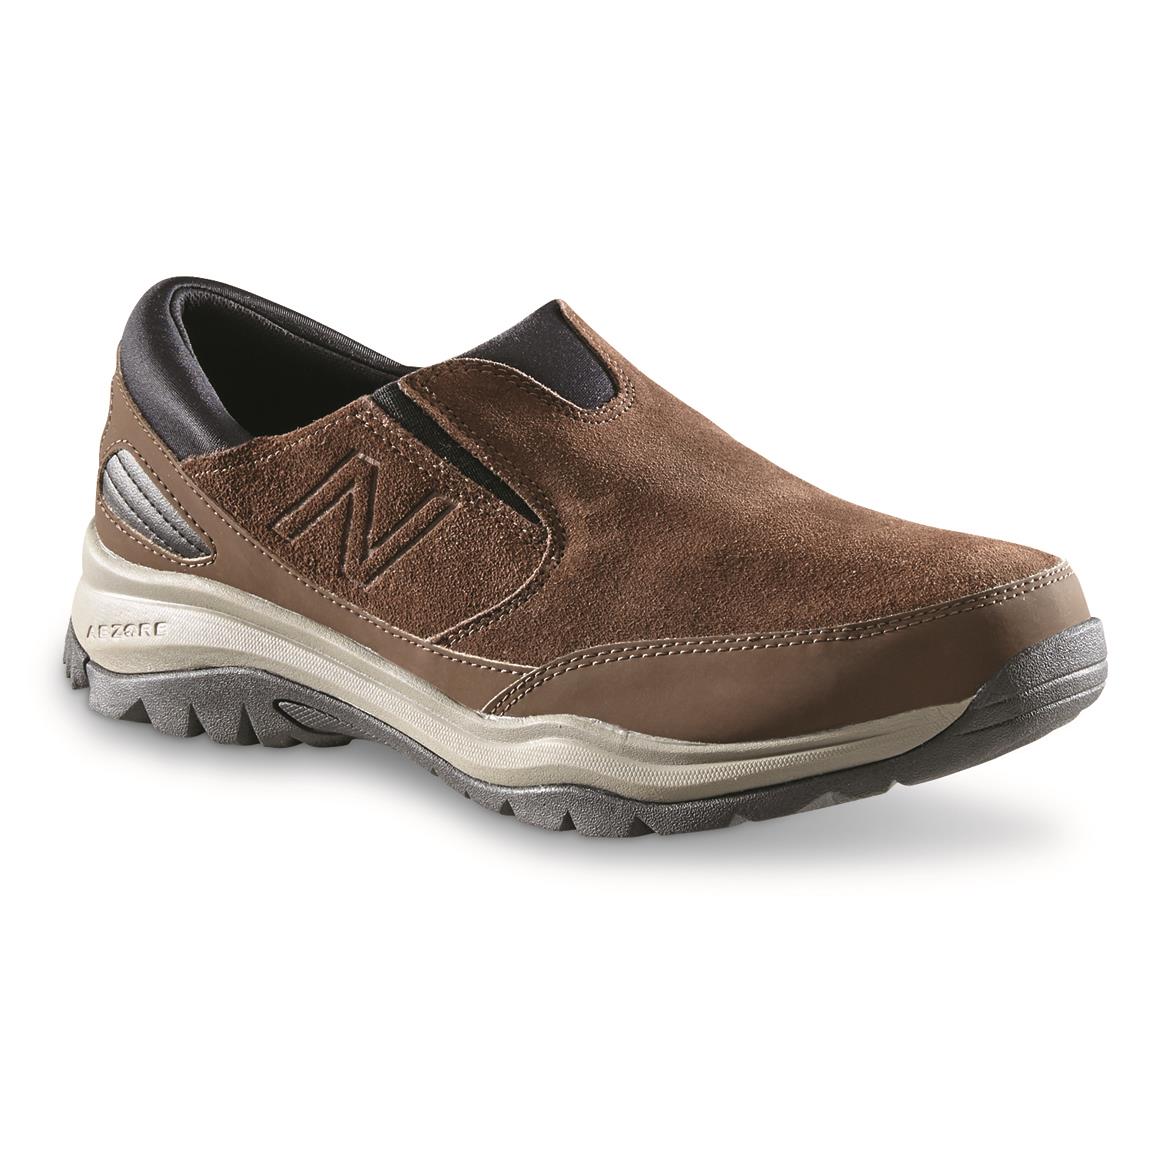 New Balance Men's 770 Trail Walking Shoes - 705644, Casual Shoes at ...